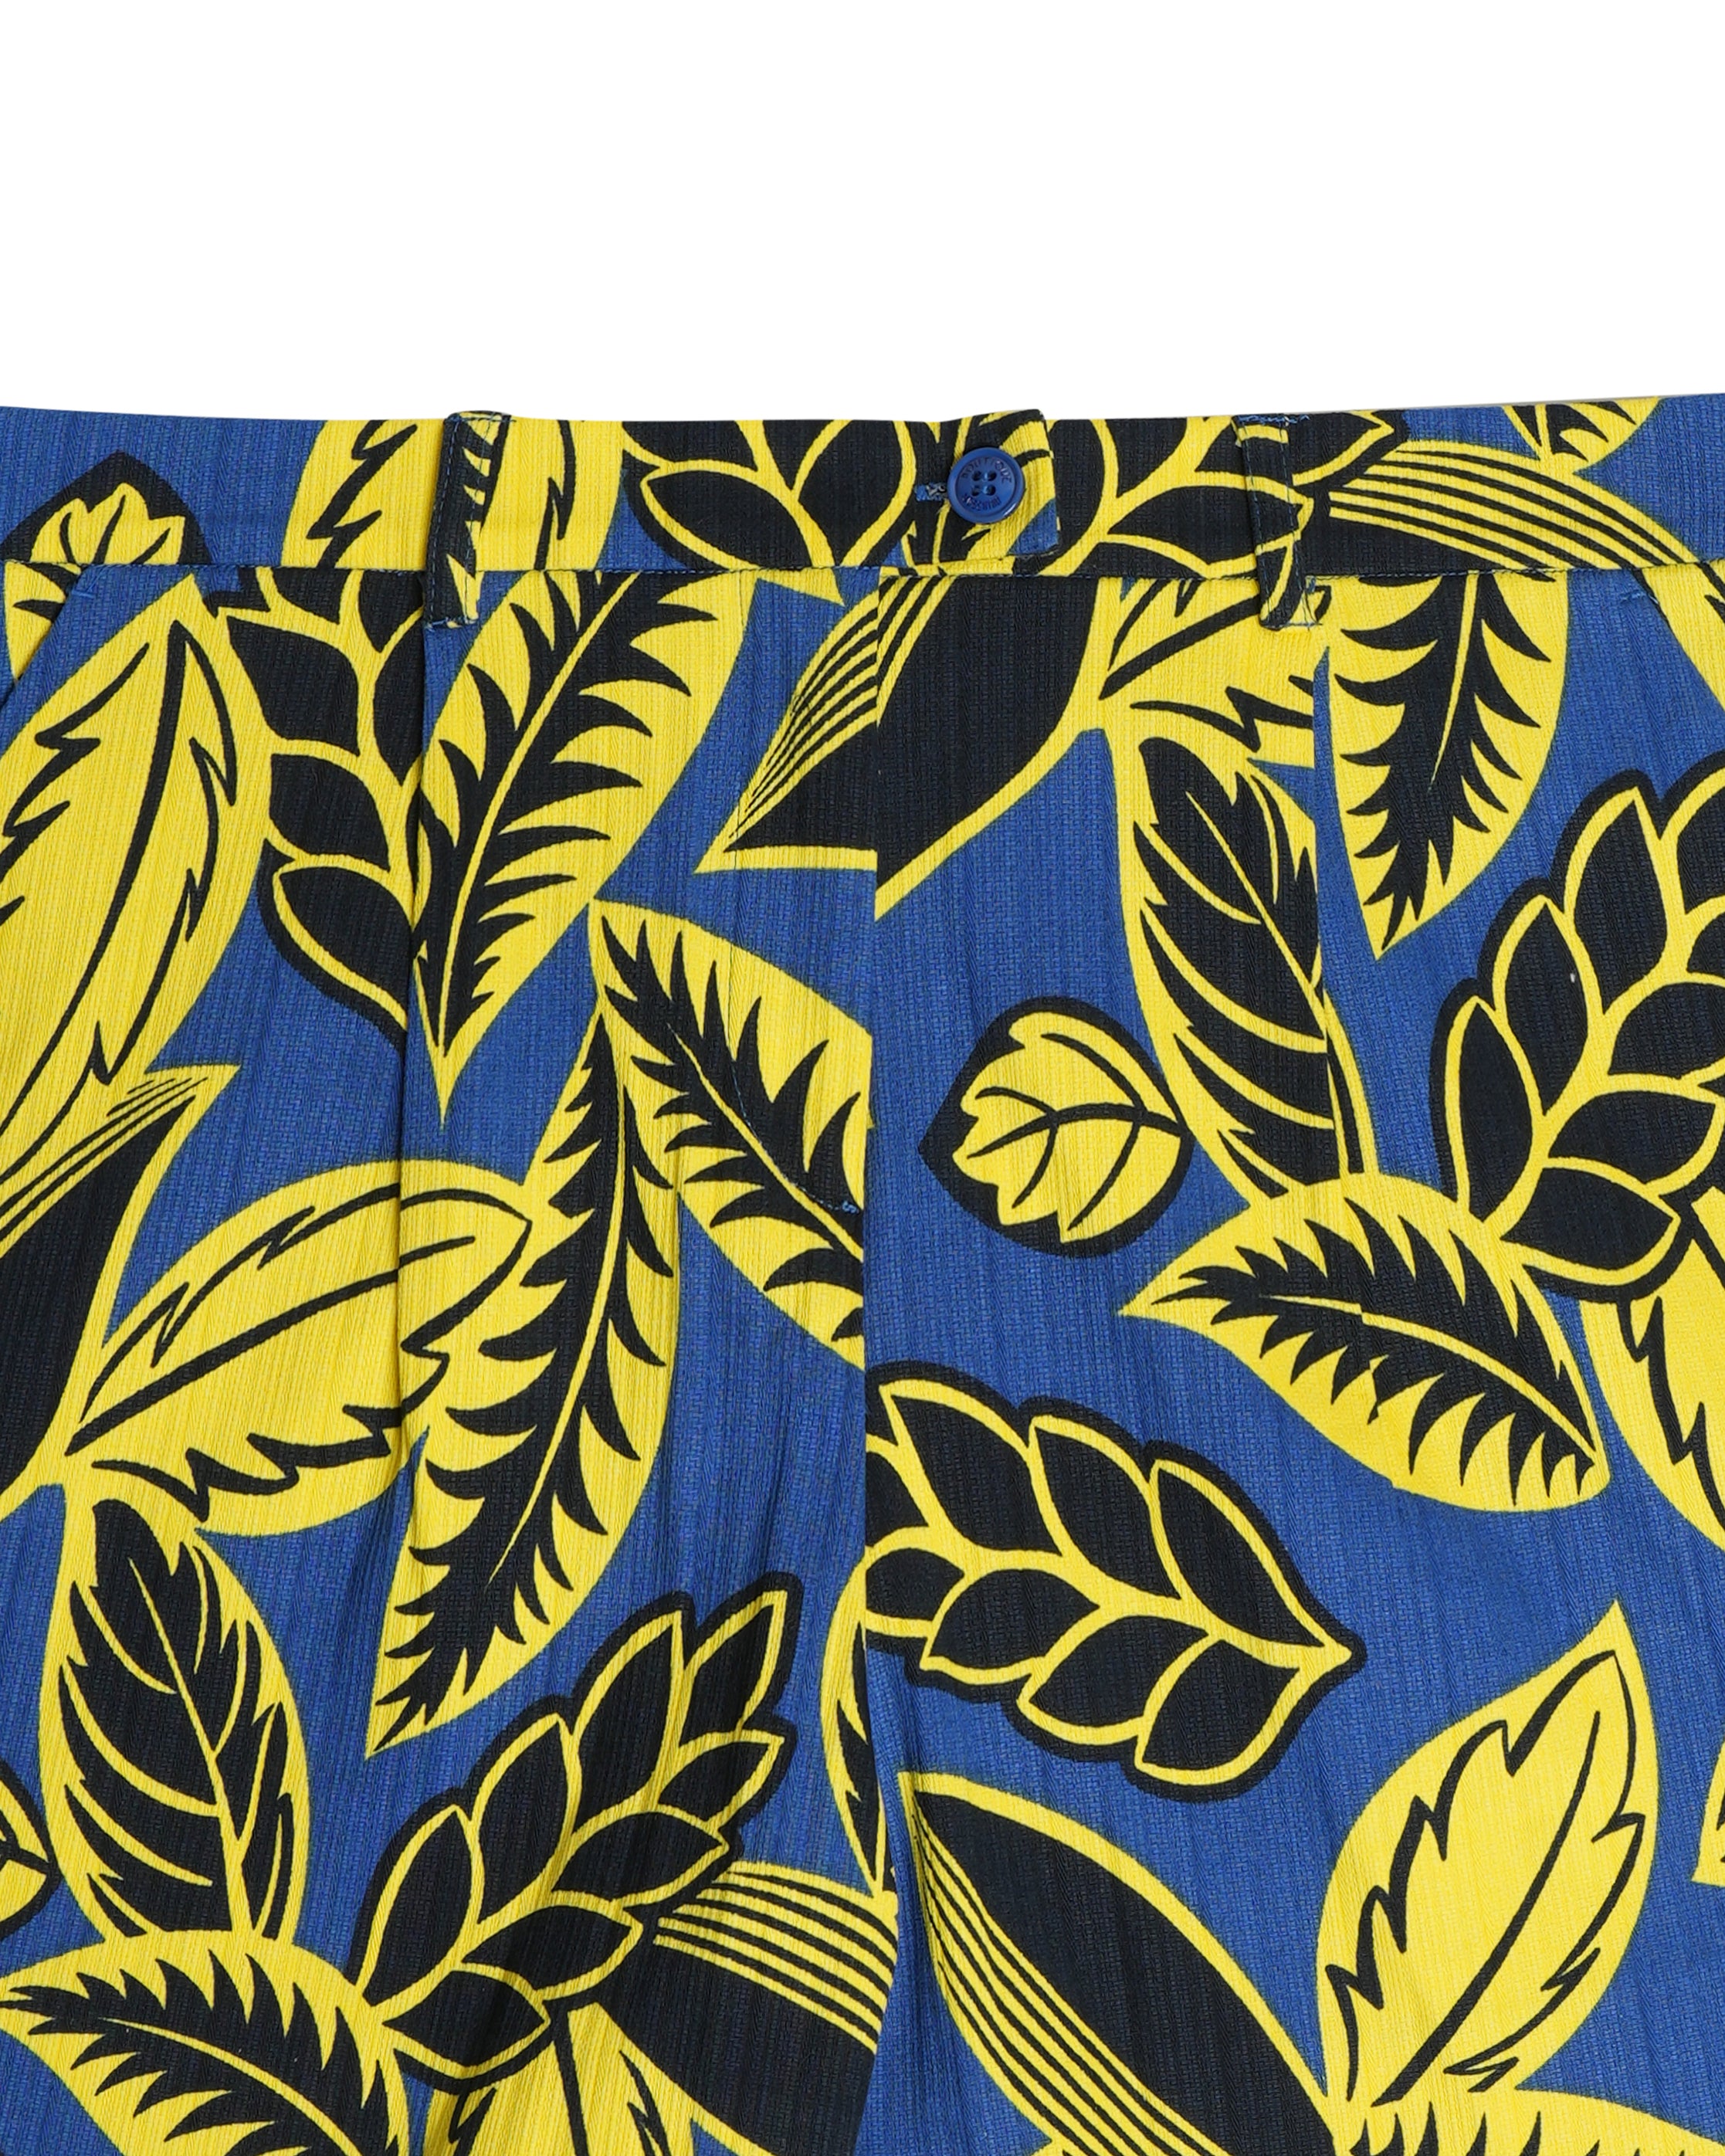 Boutique Moschino Floral Print Shorts Blue & Yellow